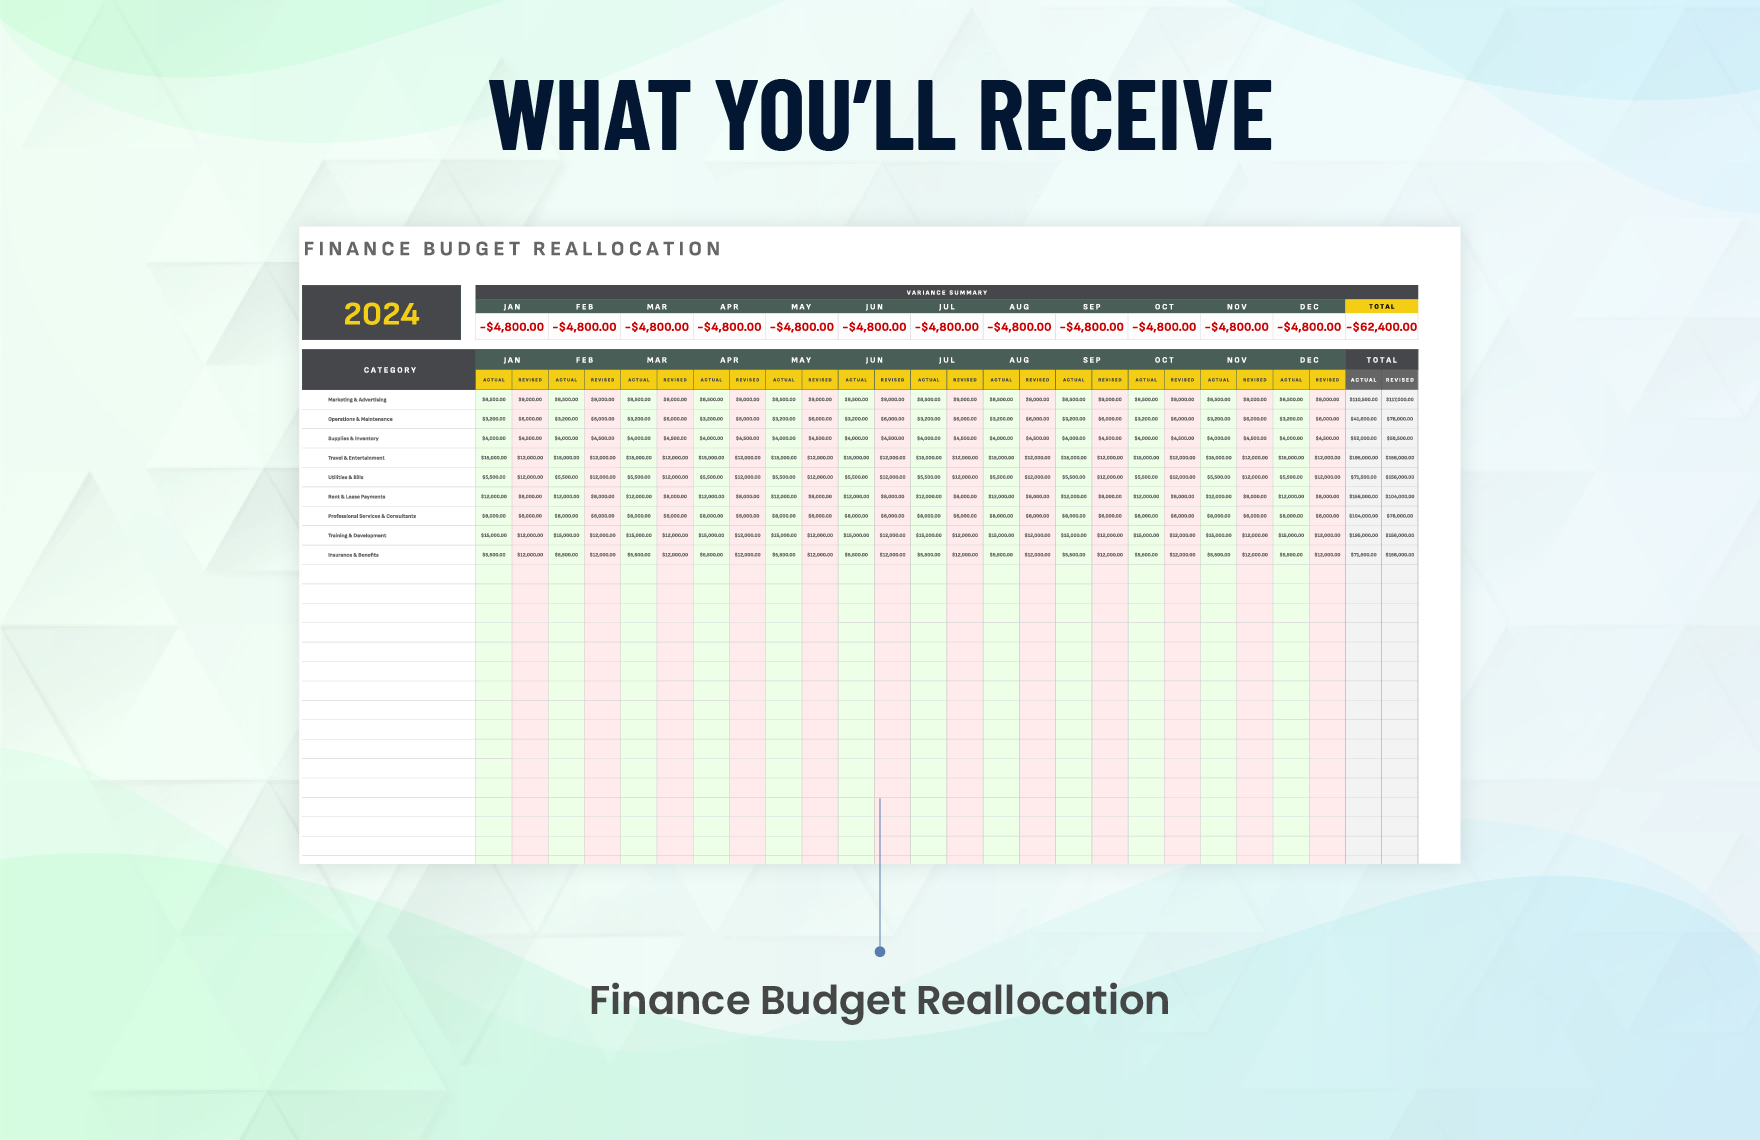 Finance Budget Reallocation Template